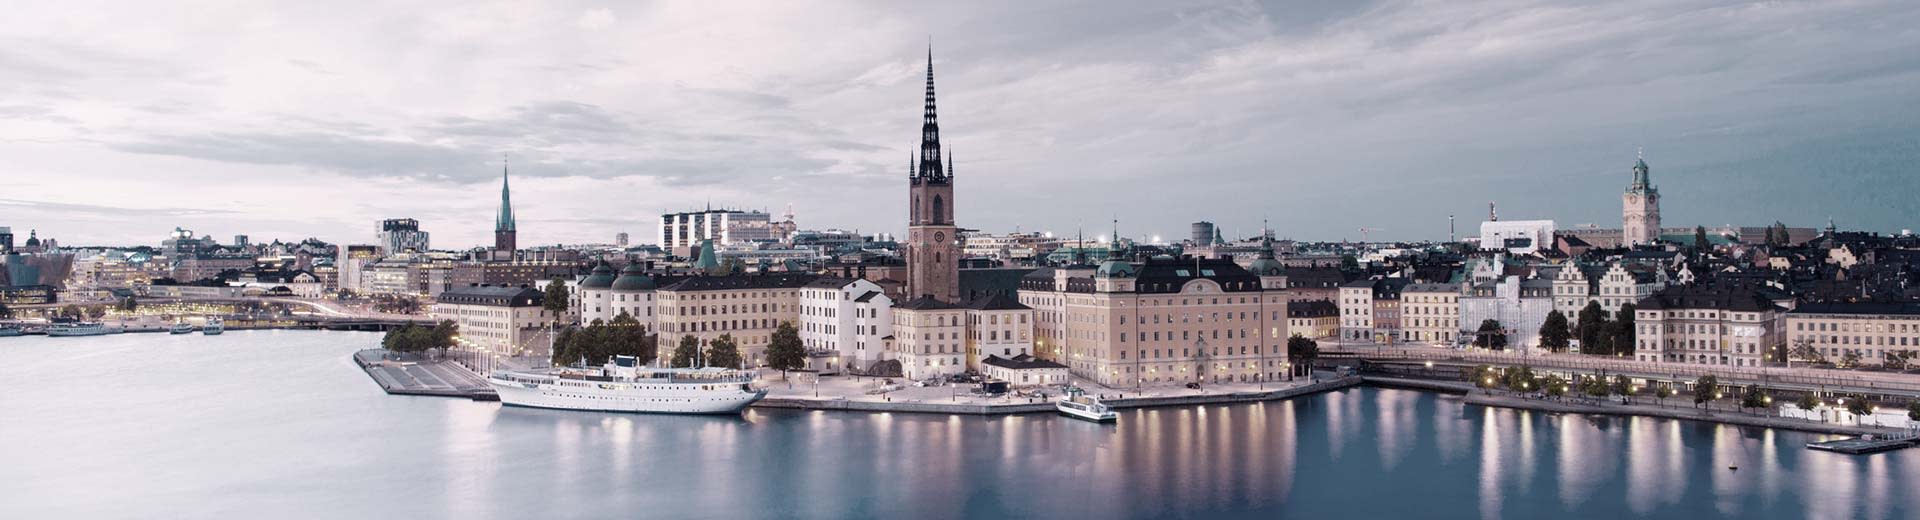 Historic buildings line the banks of Stockholm, with grey skies carpeting church steeples and more modern buildings.